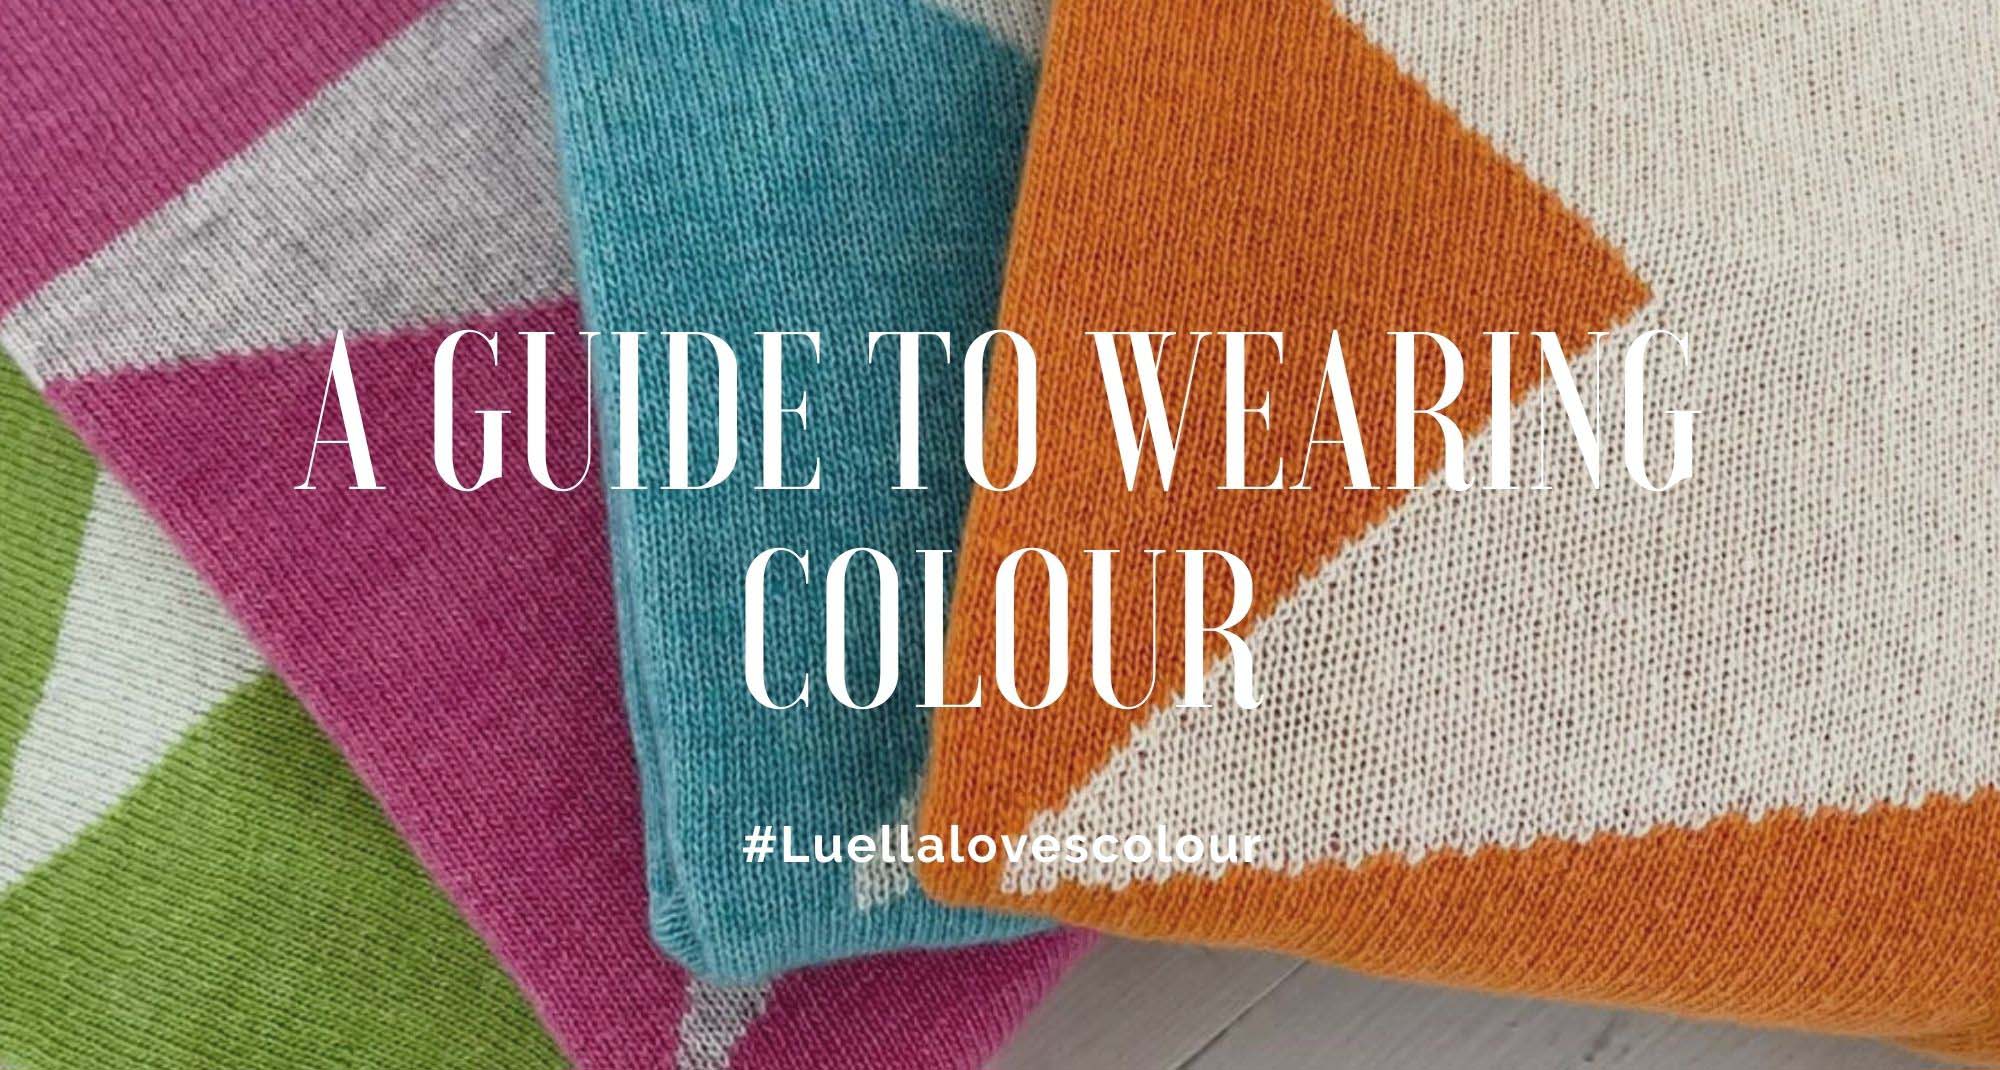 A guide to wearing colour